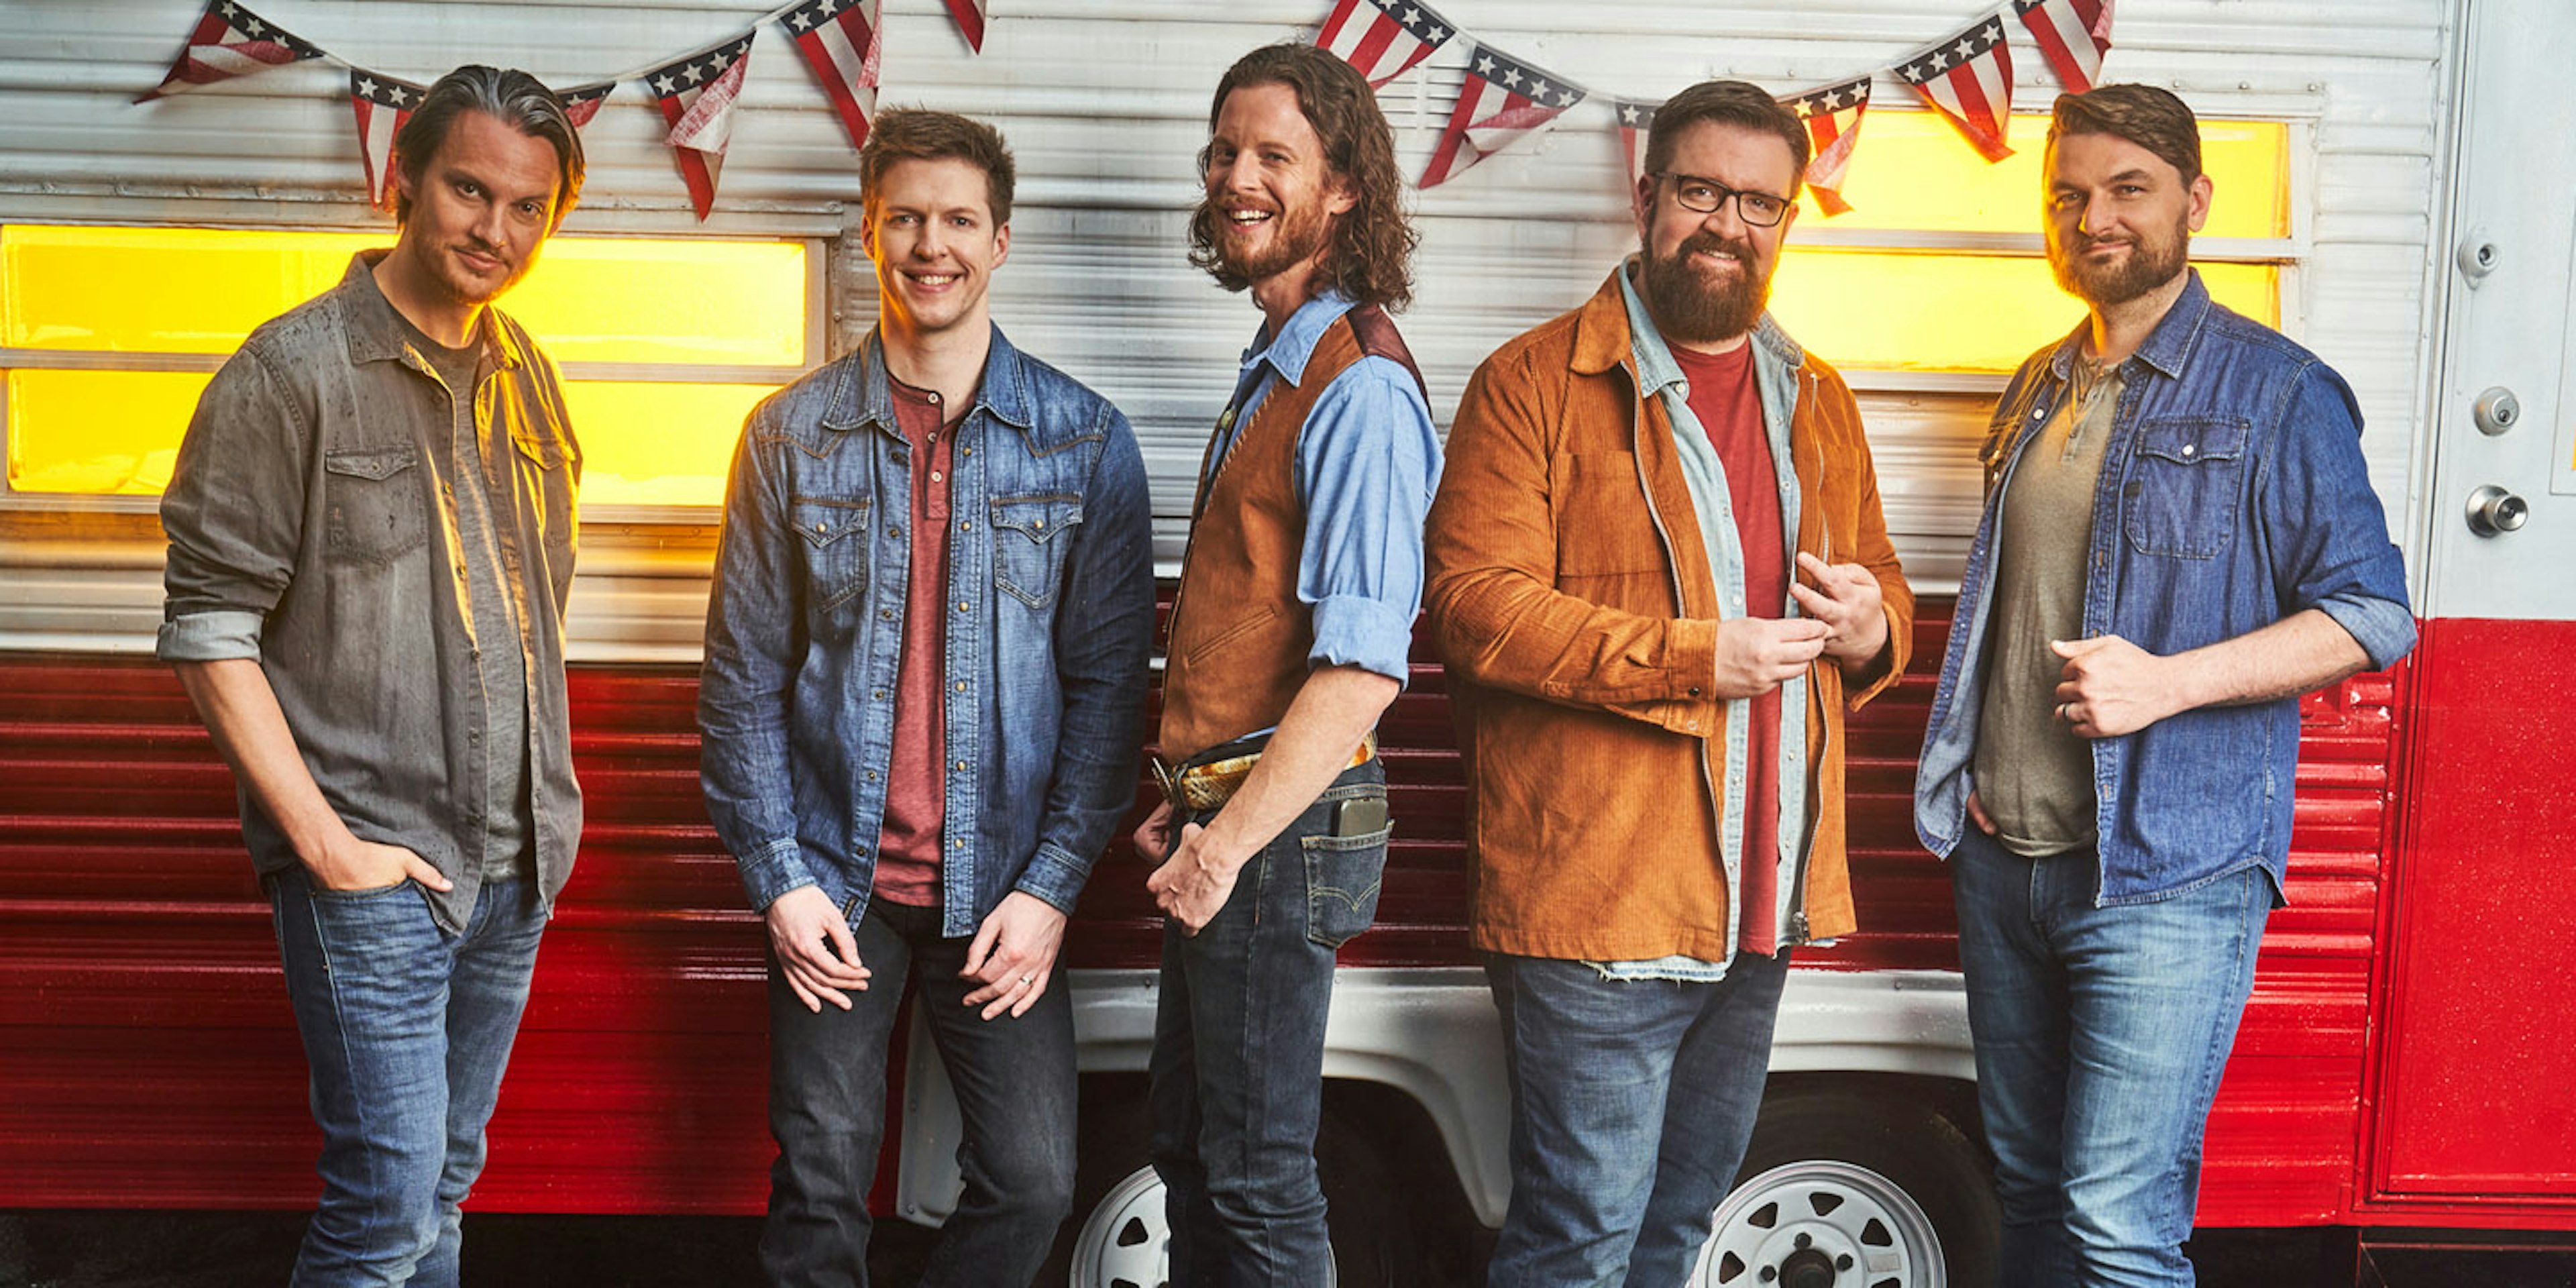 Home Free at The Alabama Theatre